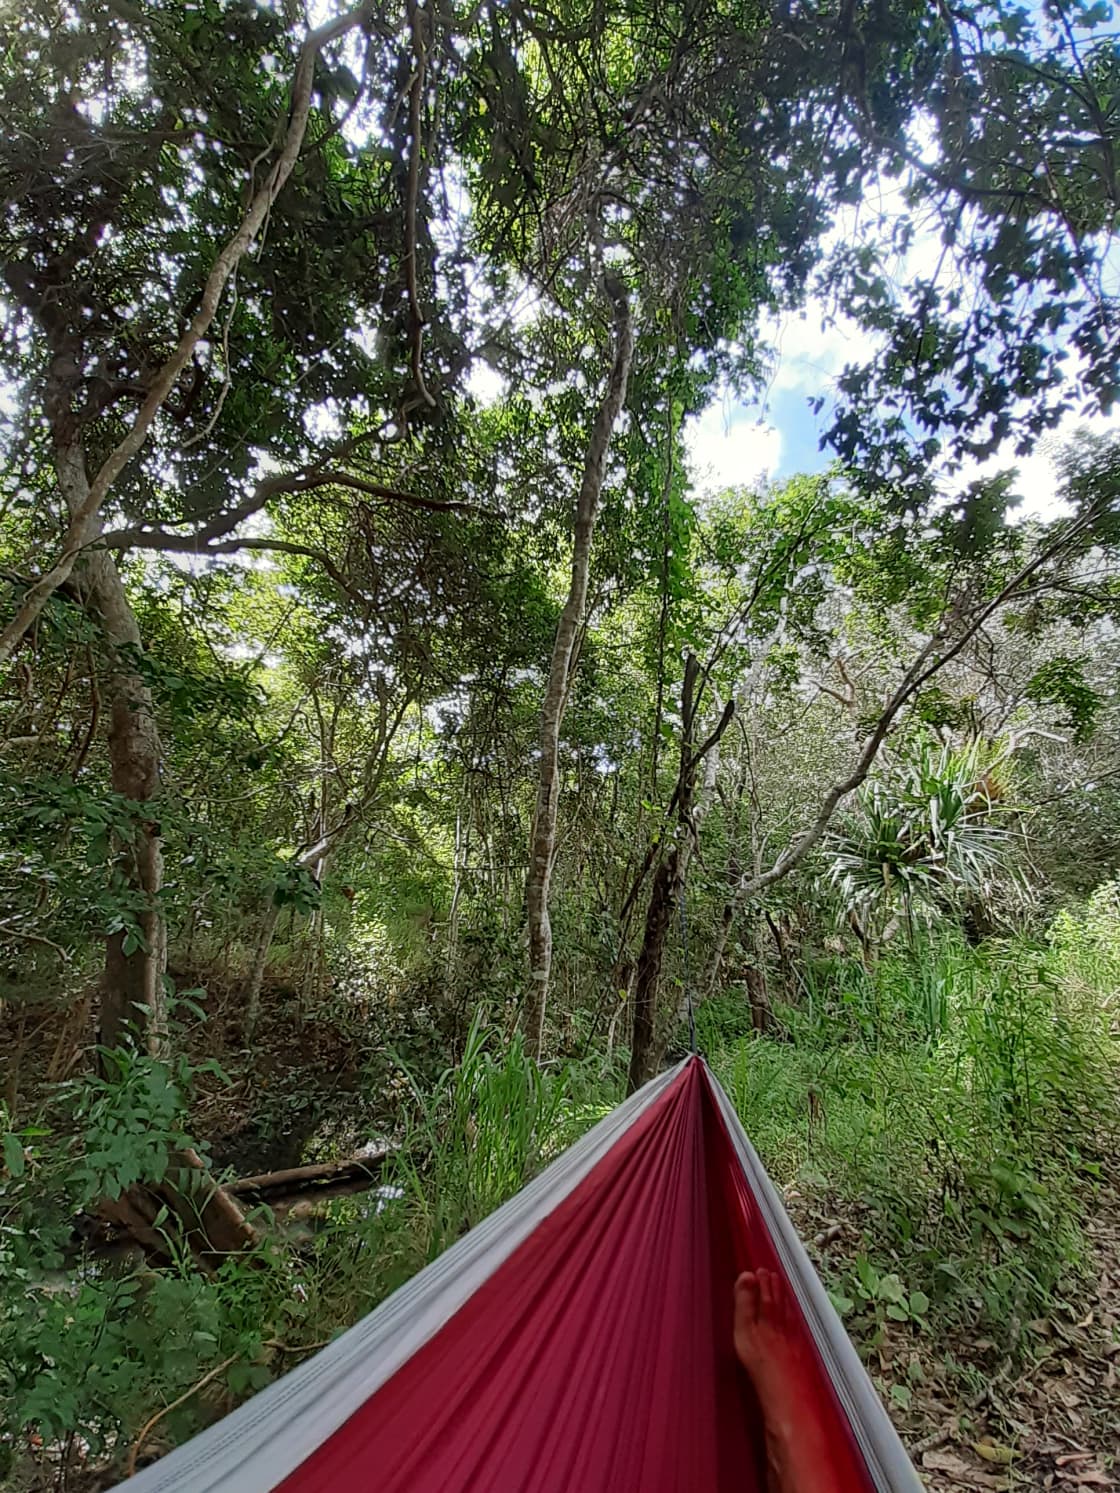 Relaxing in the hammock under the canopy